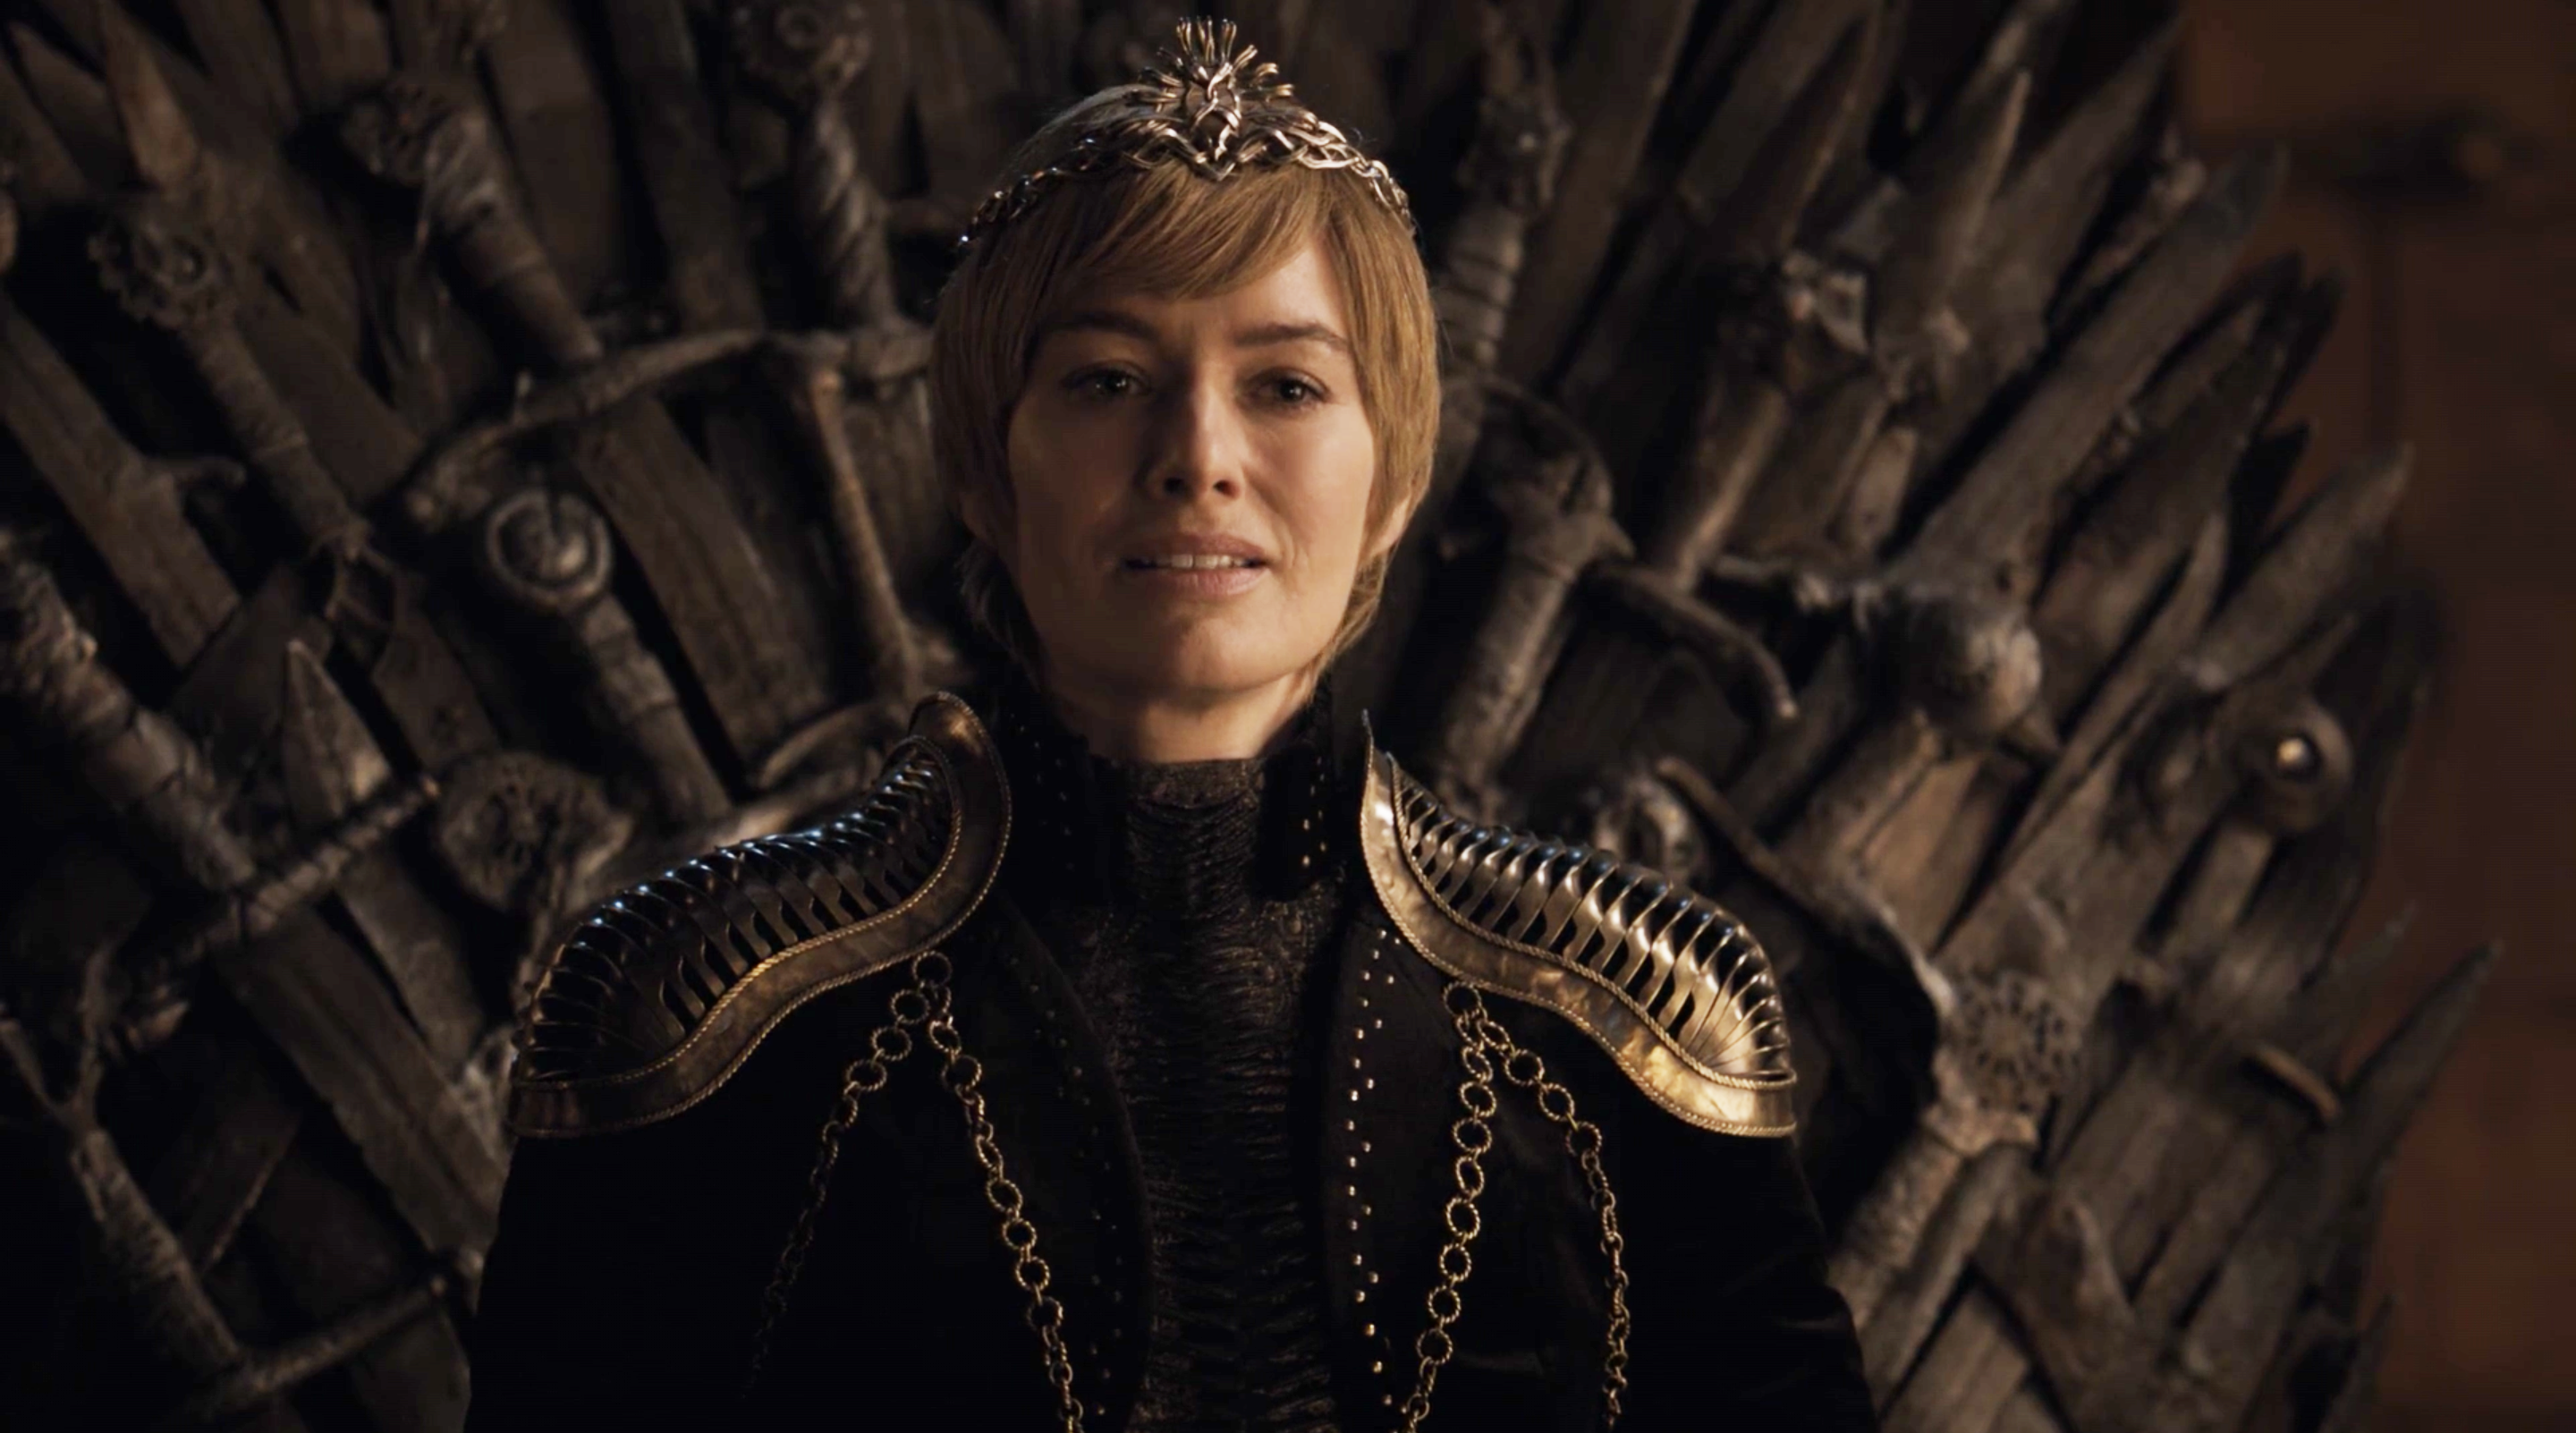 How Would You Die in “Game of Thrones”? Queen Cersei